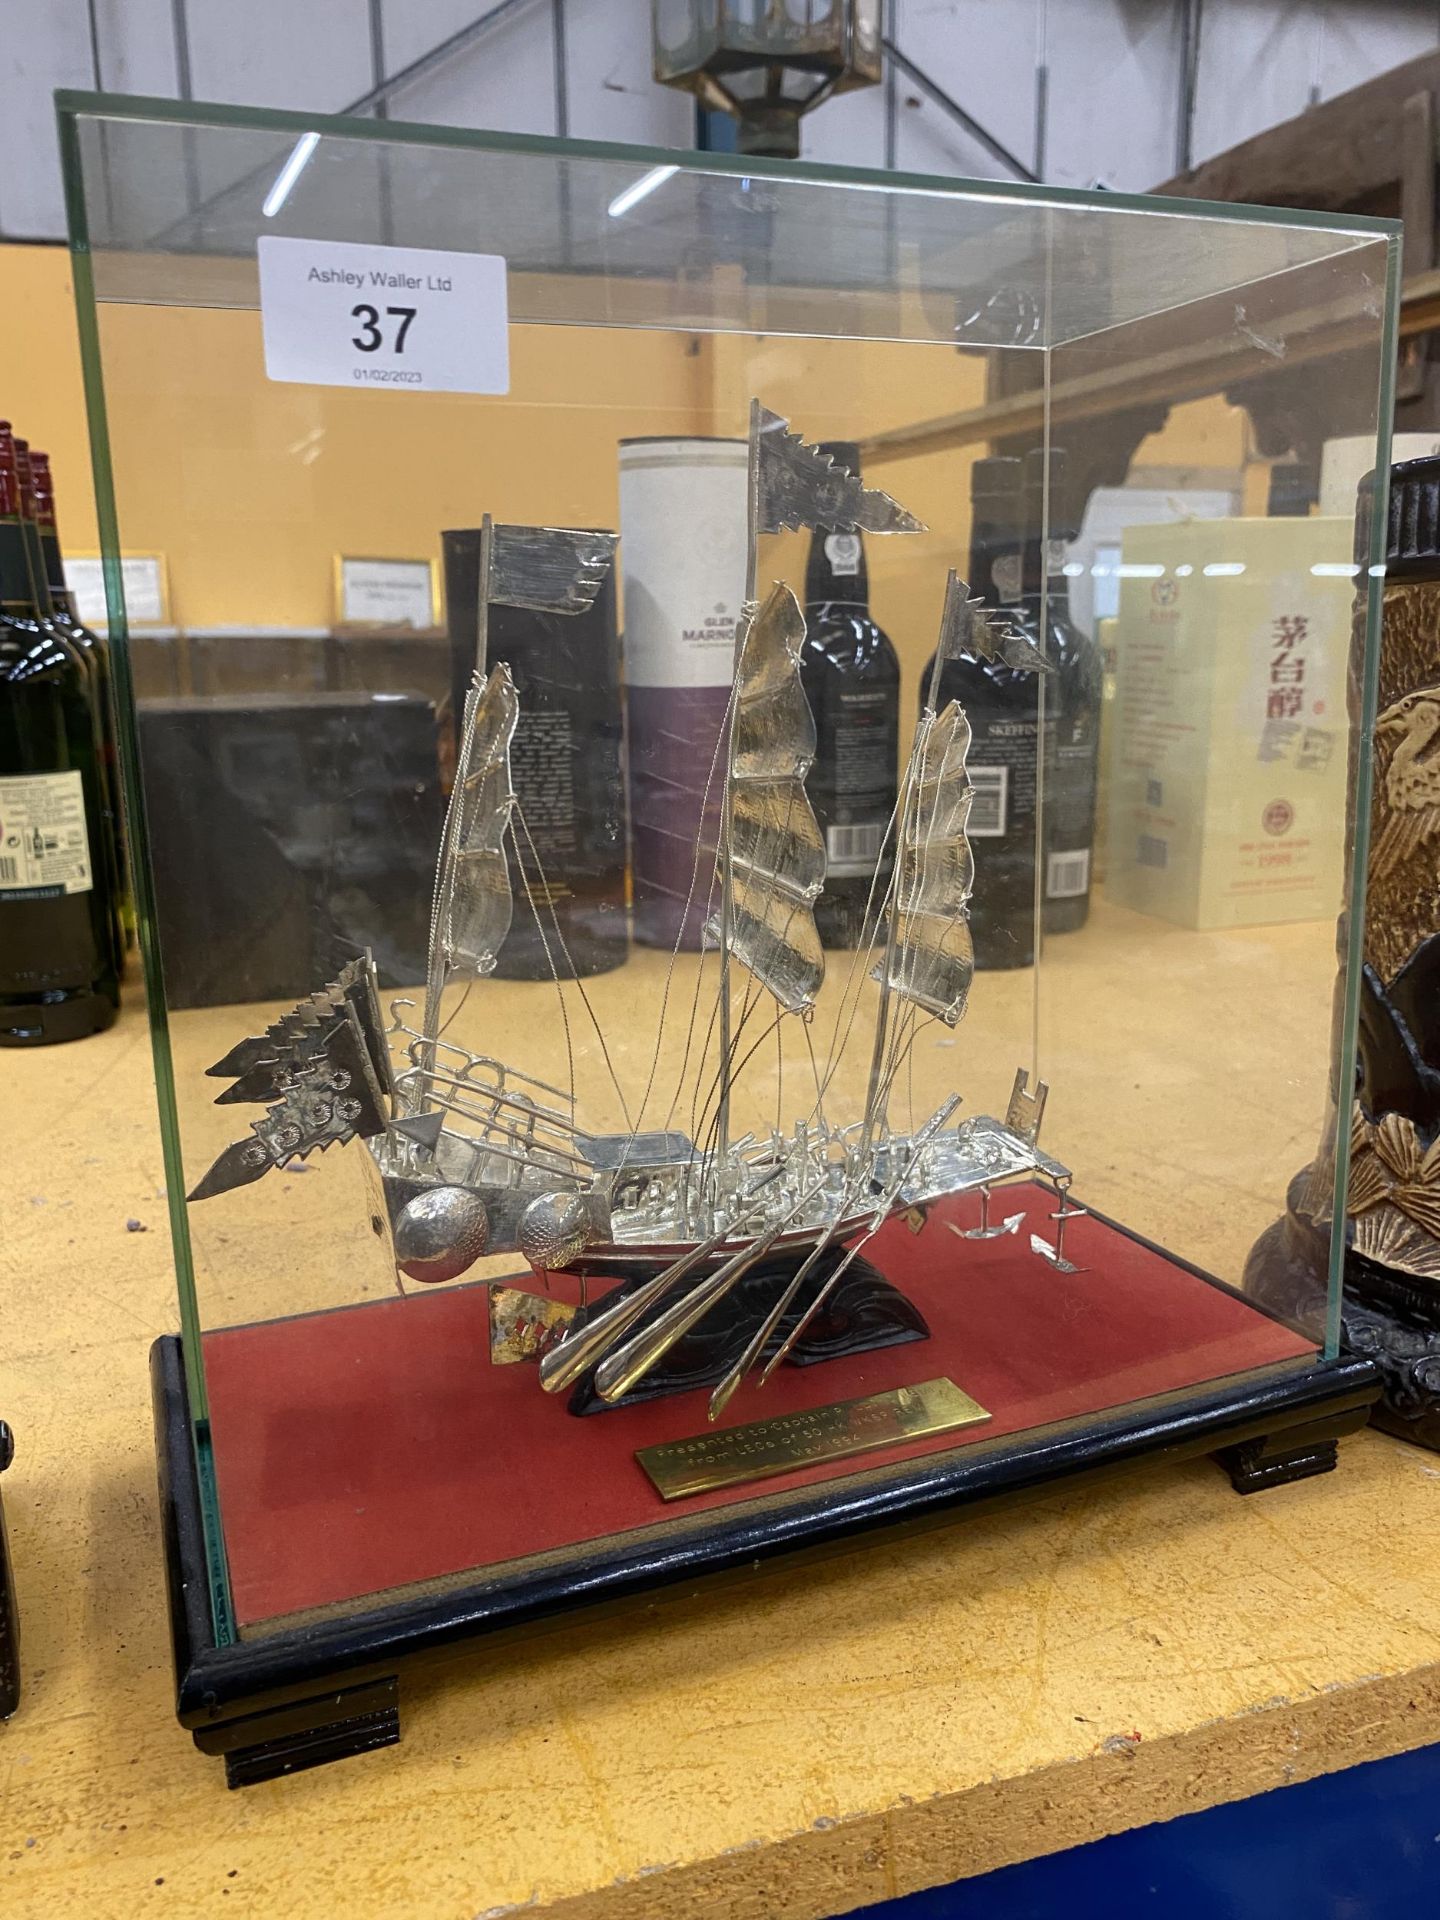 A PRESENTATION SILVER EFFECT WHITE METAL MODEL OF A BOAT IN A GLASS DISPLAY CASE